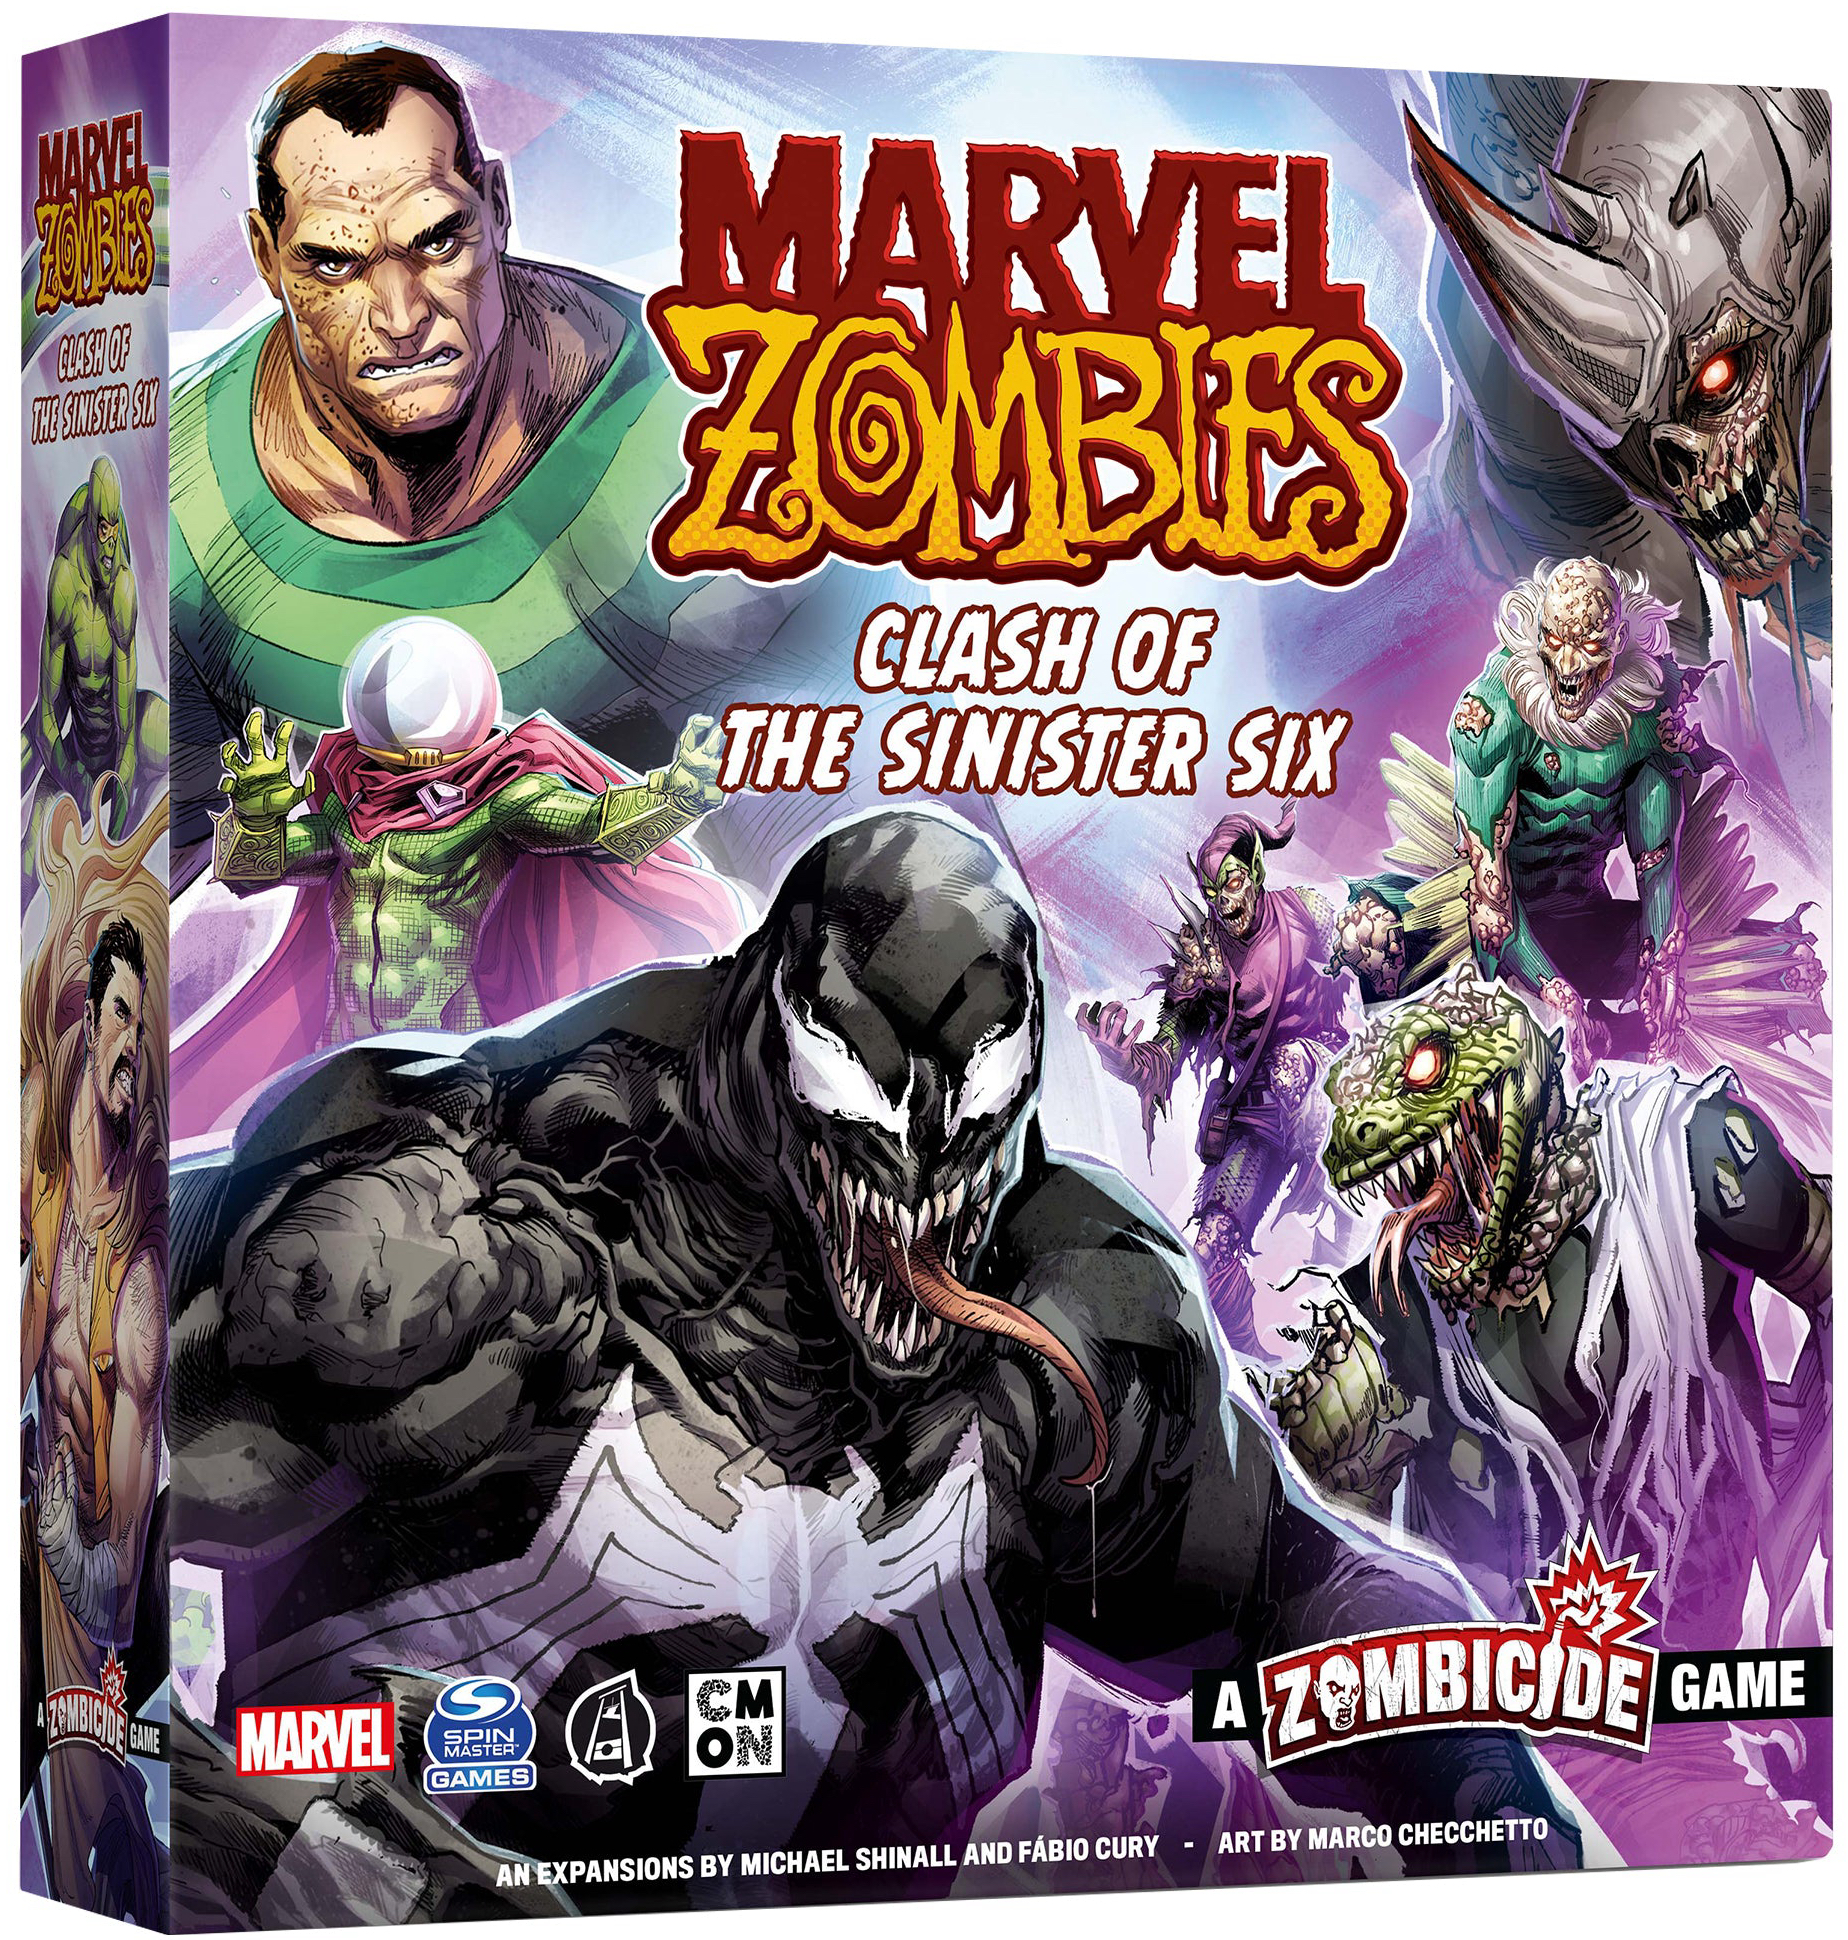 Marvel Zombies: A Zombicide Game - Clash of the Sinister Six